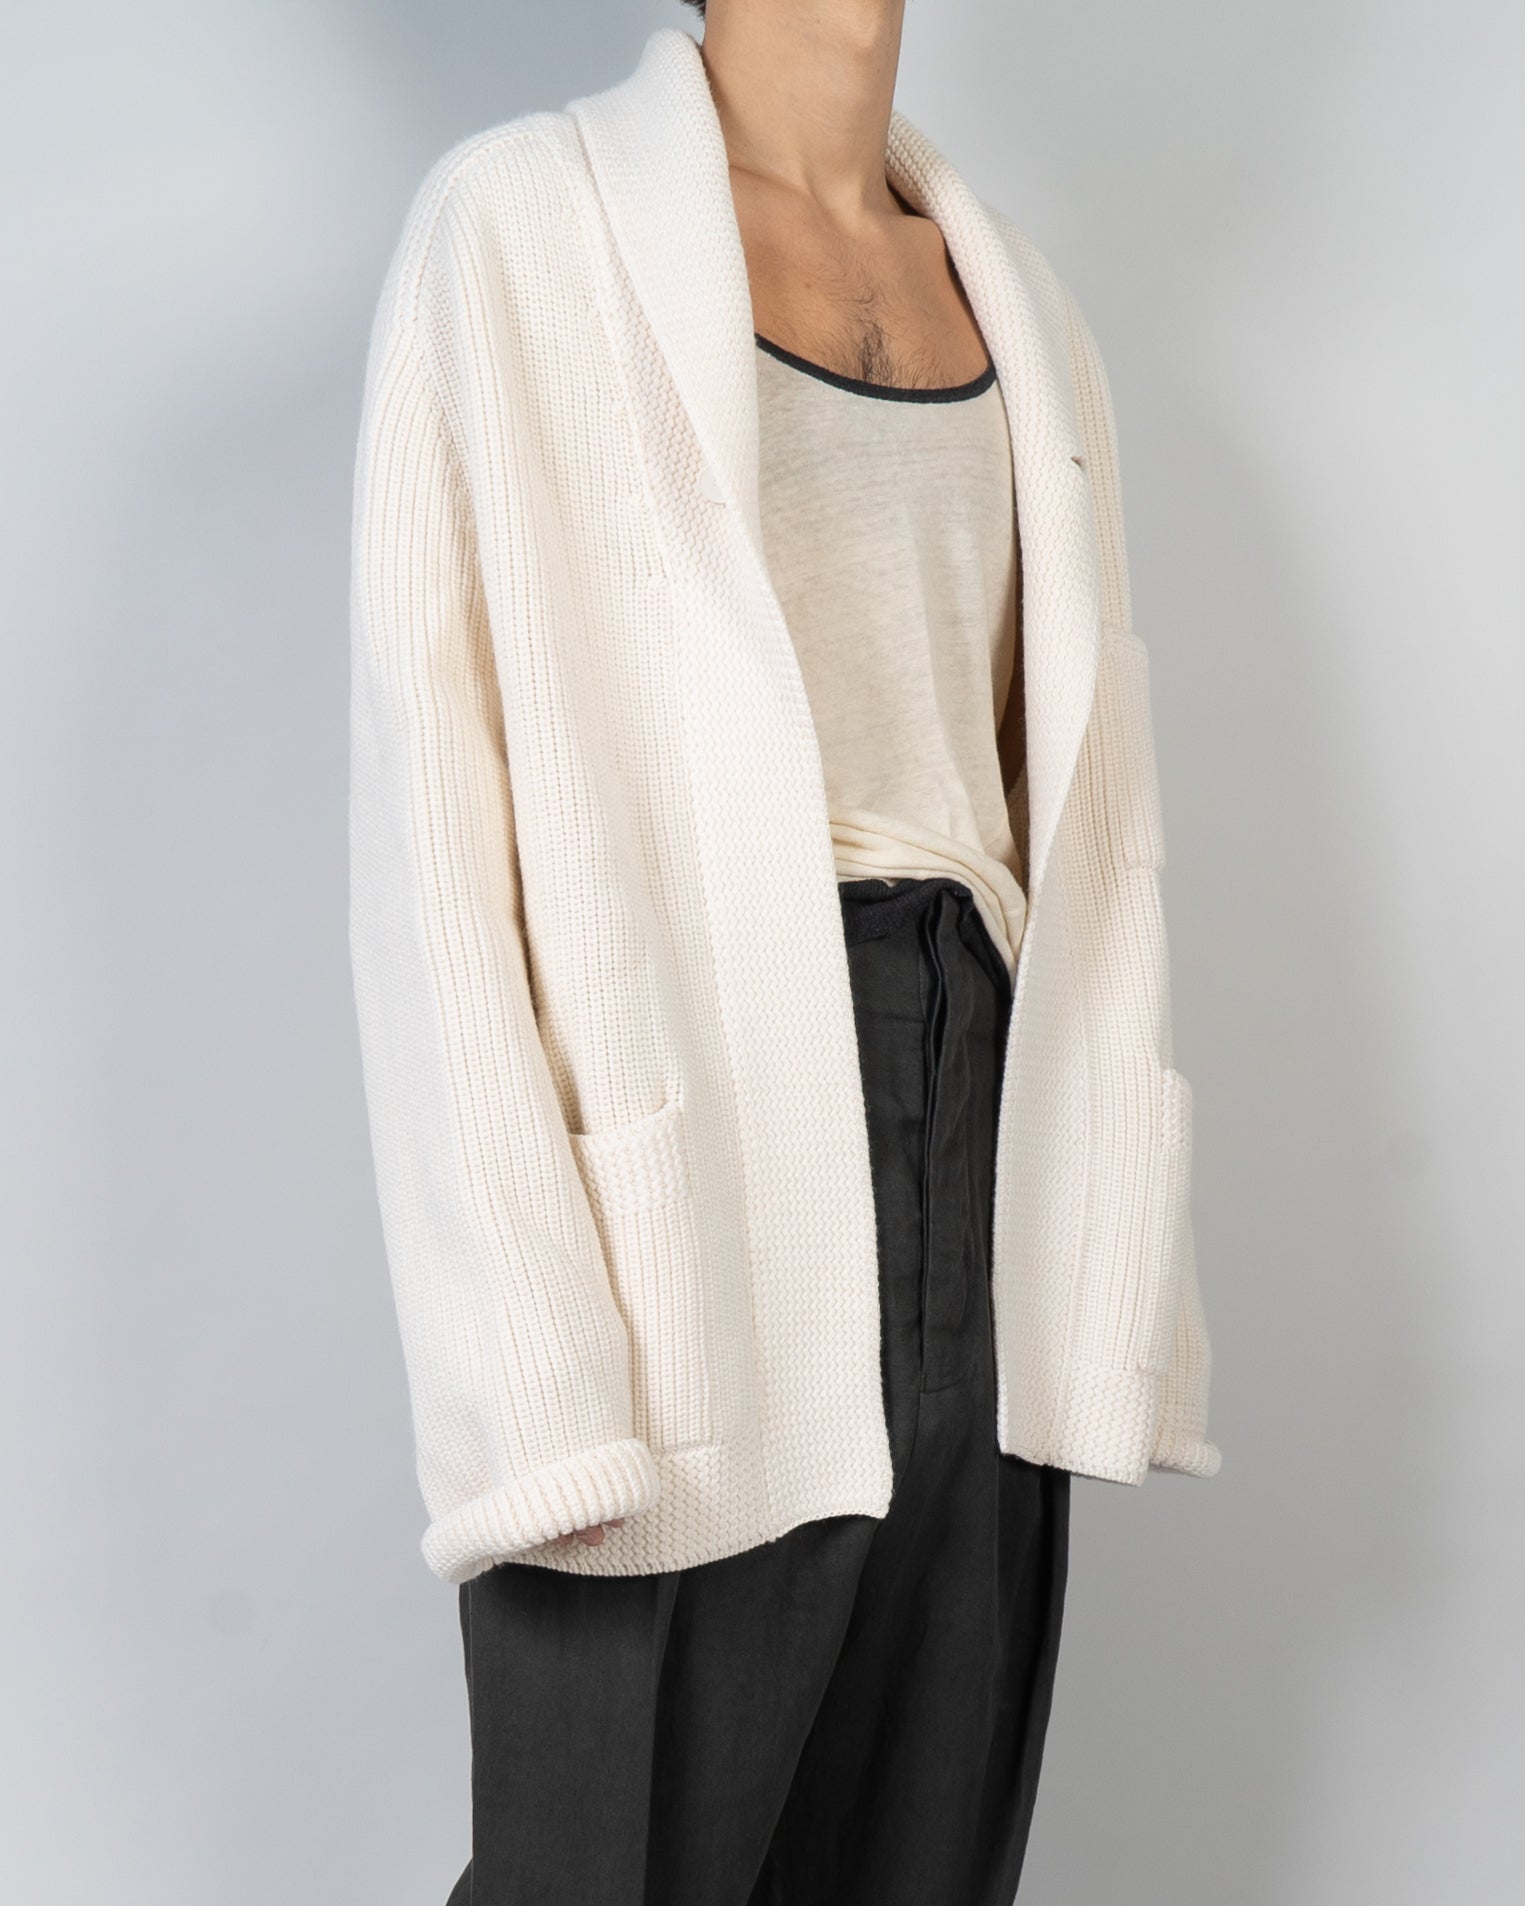 FW20 Knitted Ivory Cardigan Sample